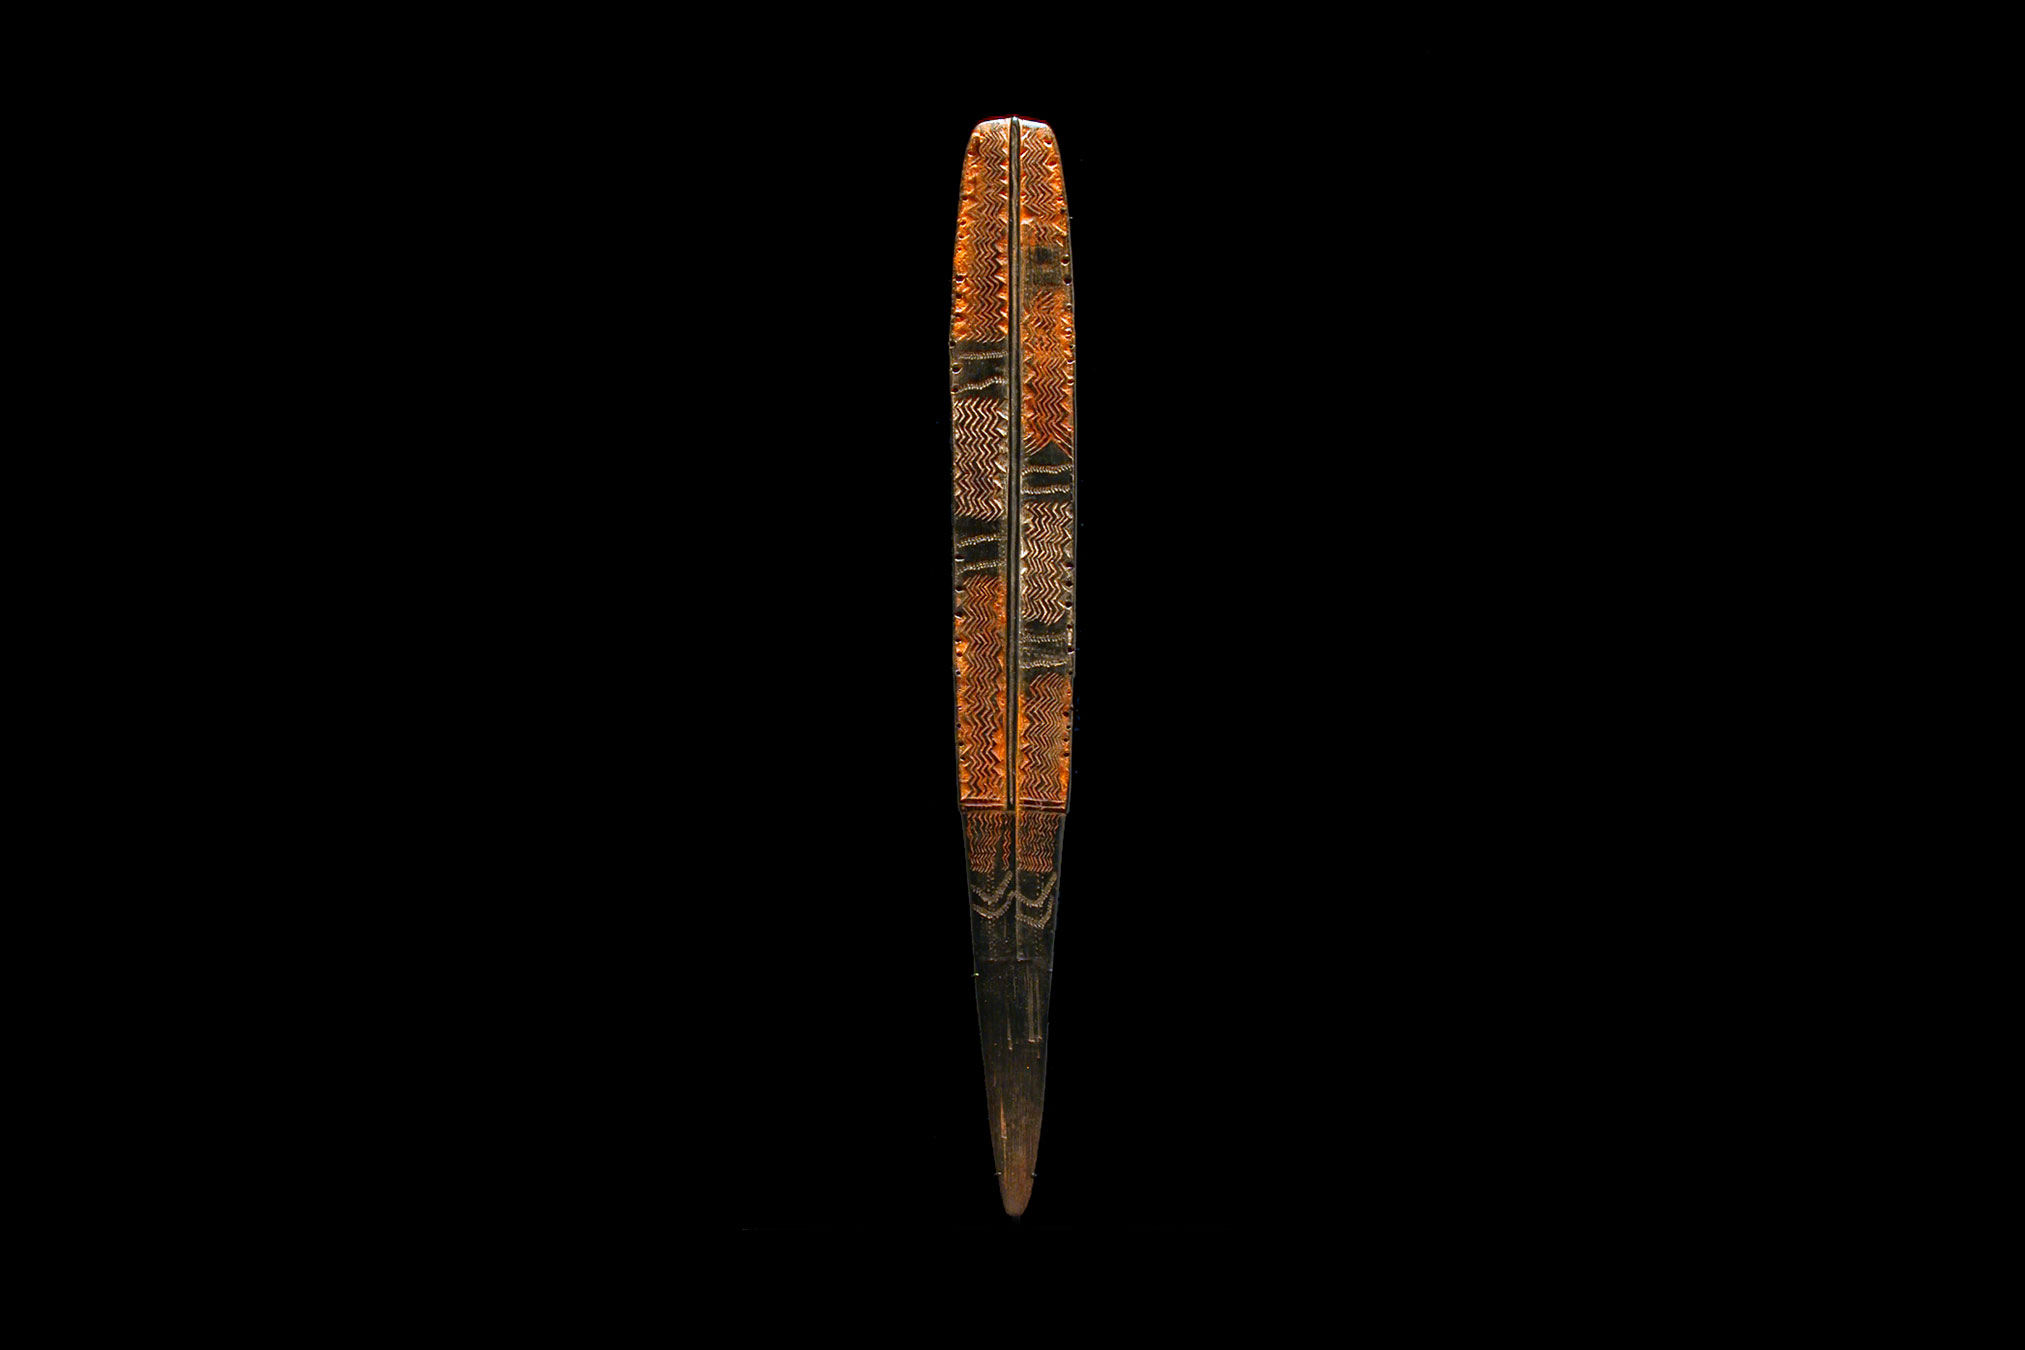 Sold at Auction: AFRICAN HARPOON SPEAR WITH SAW BLADE